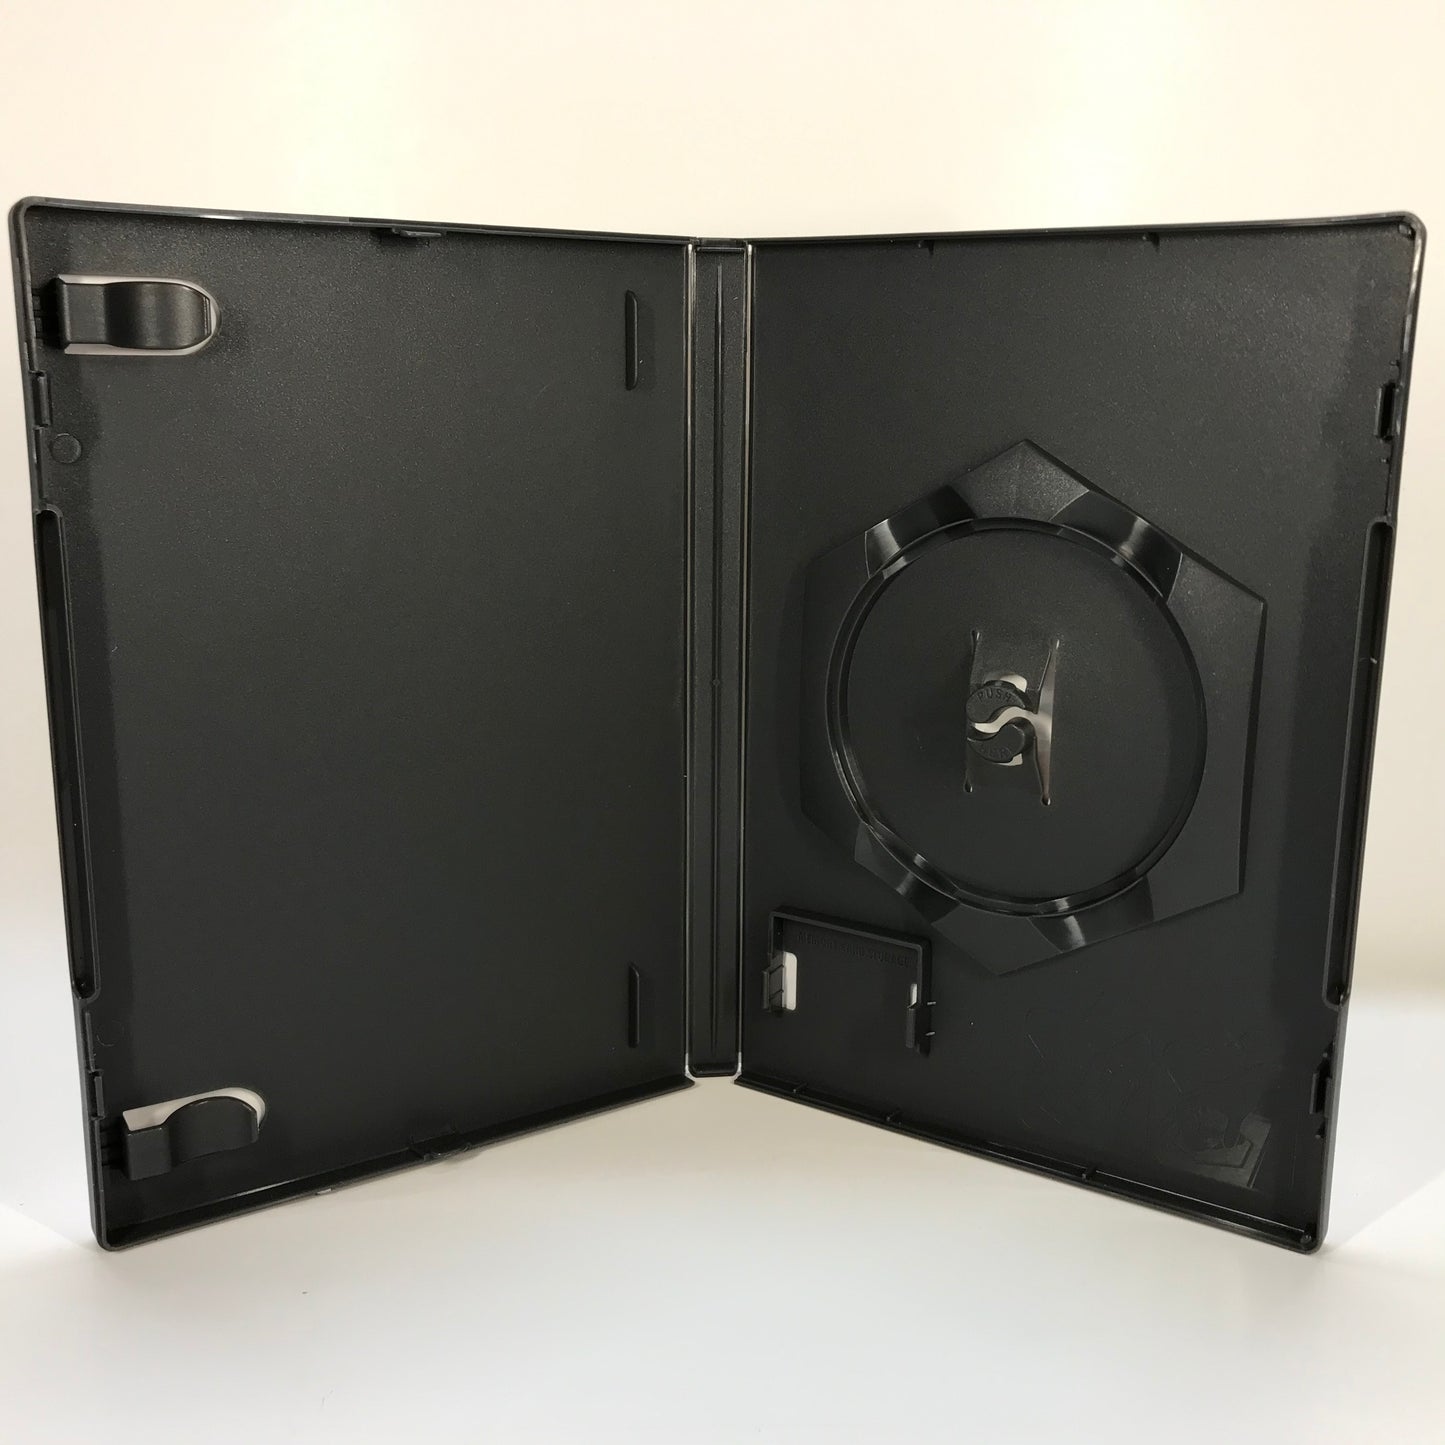 GameCube Replacement Case - NO GAME - 007 From Russia with Love